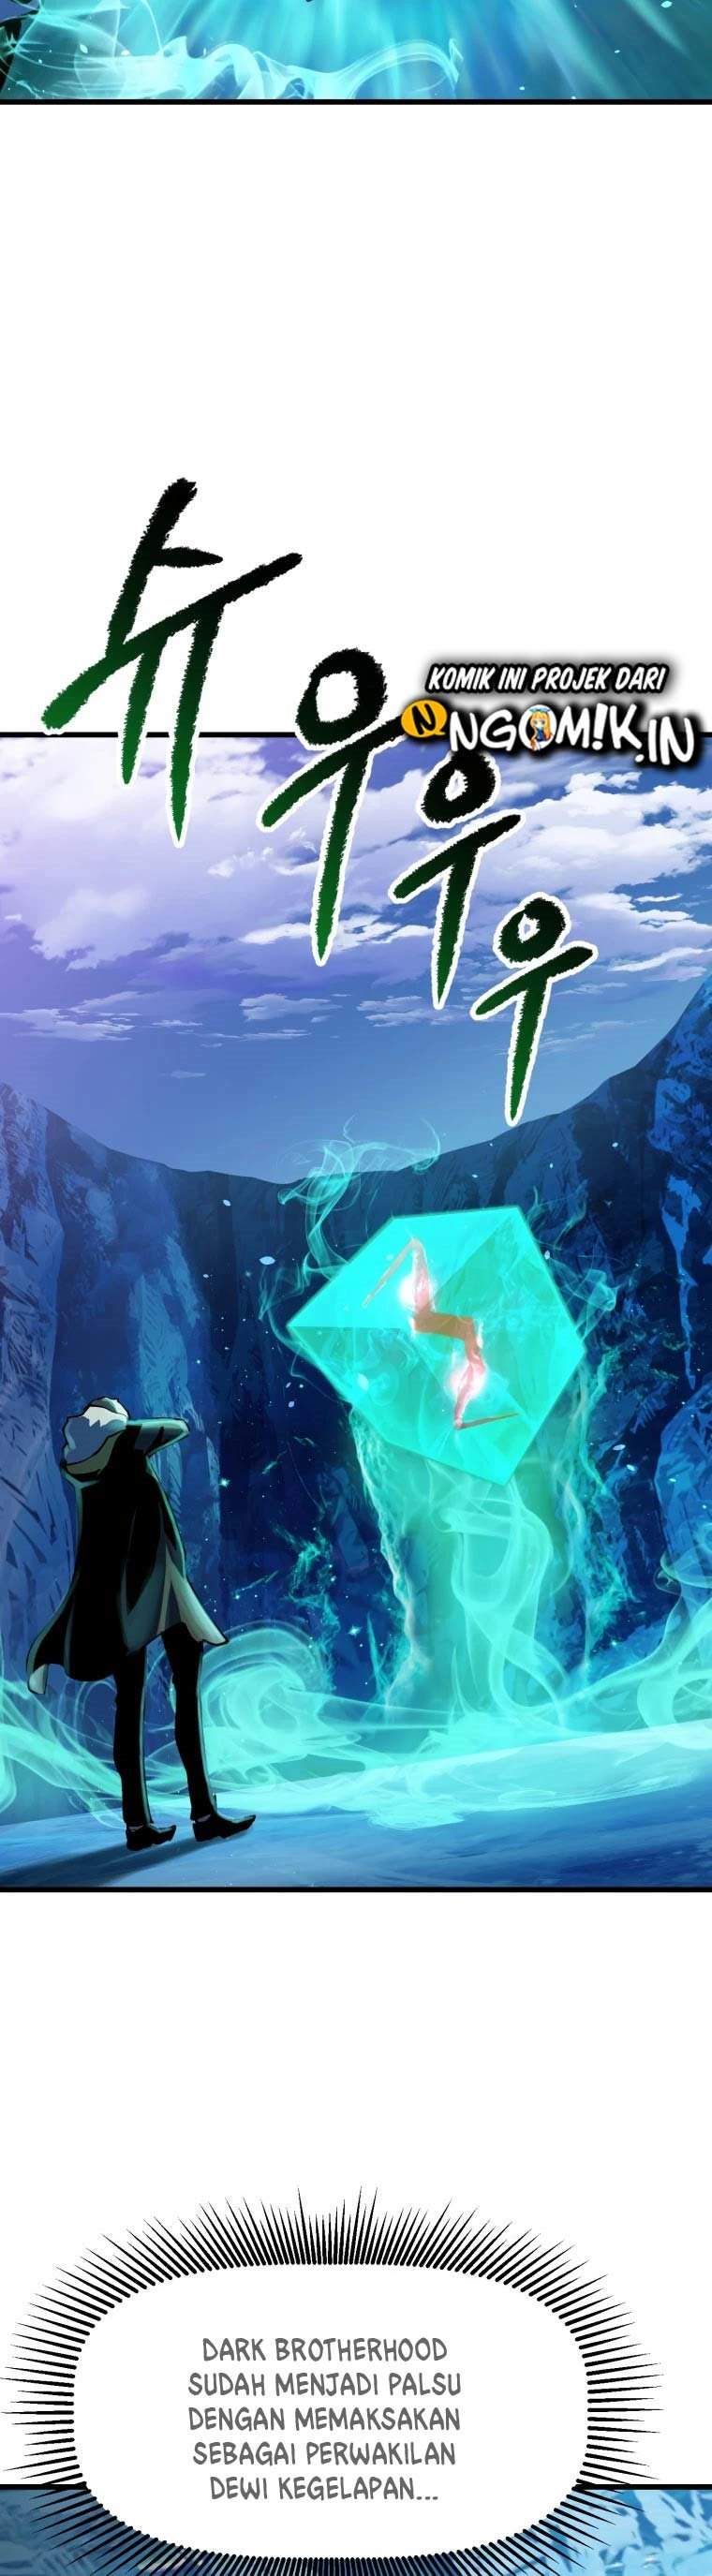 Otherworldly Sword King’s Survival Records Chapter 103